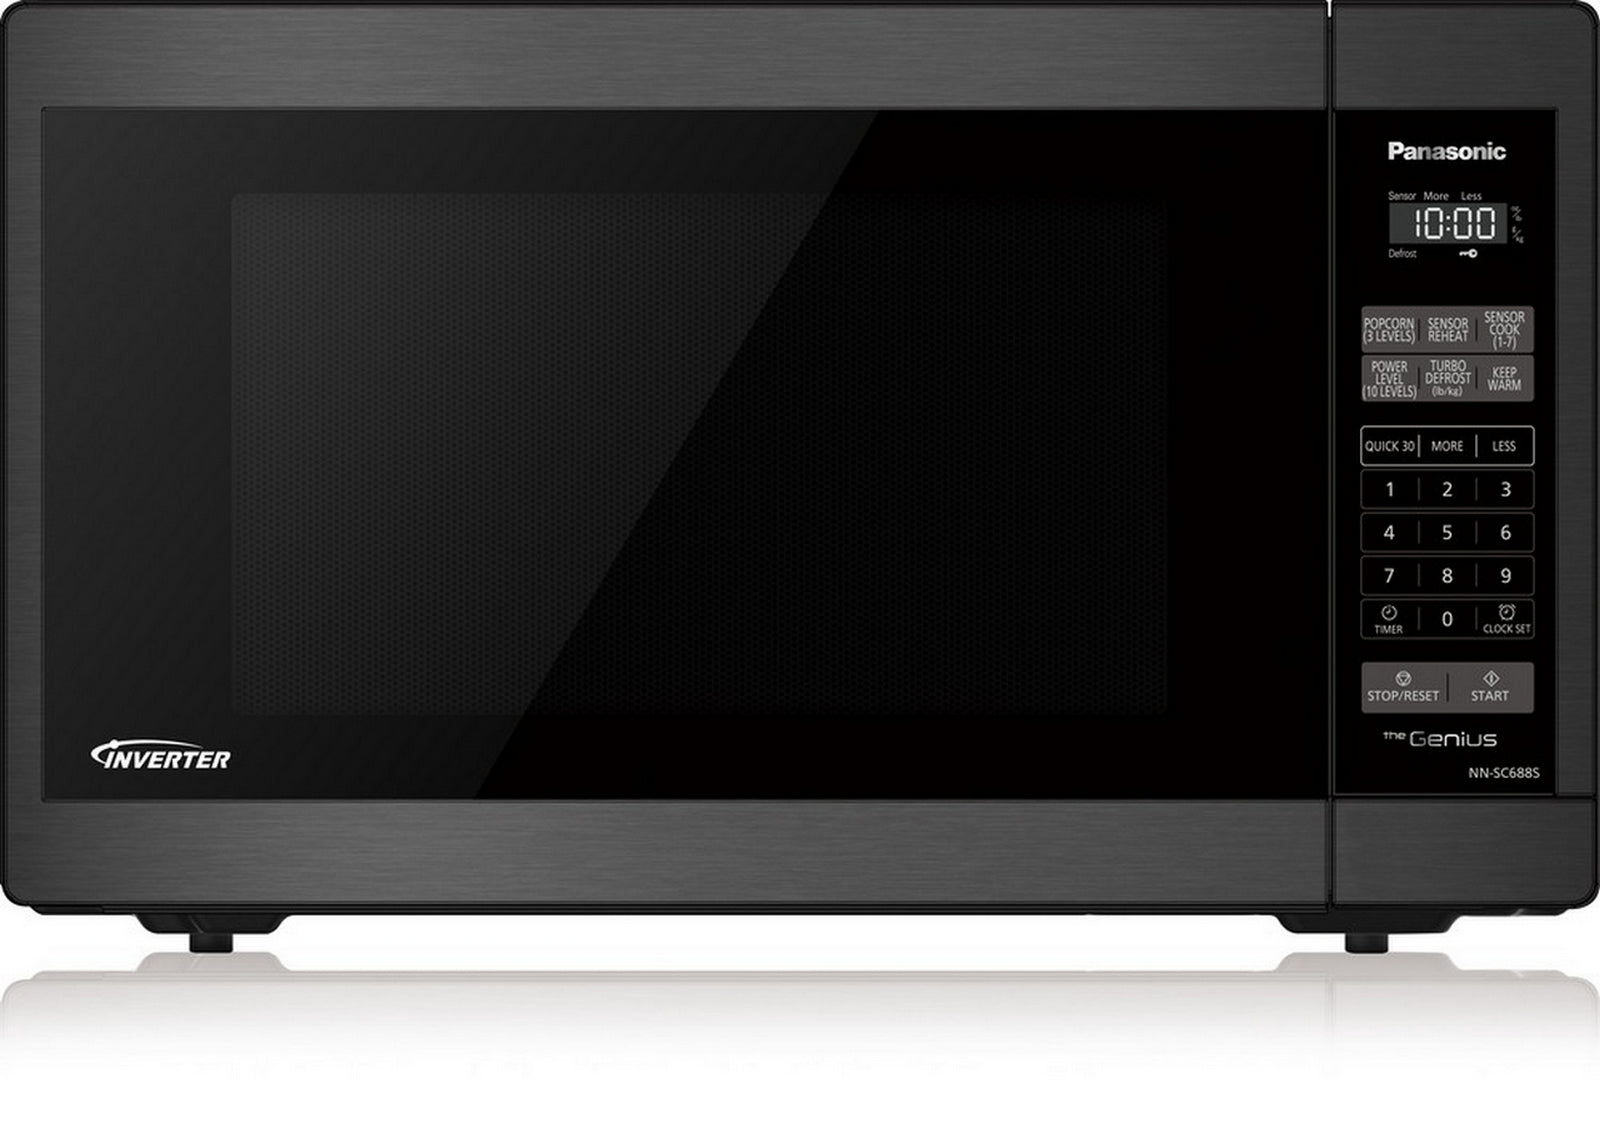 Panasonic - 1.3 cu. Ft  Counter top Microwave in Black Stainless - NNSC688S